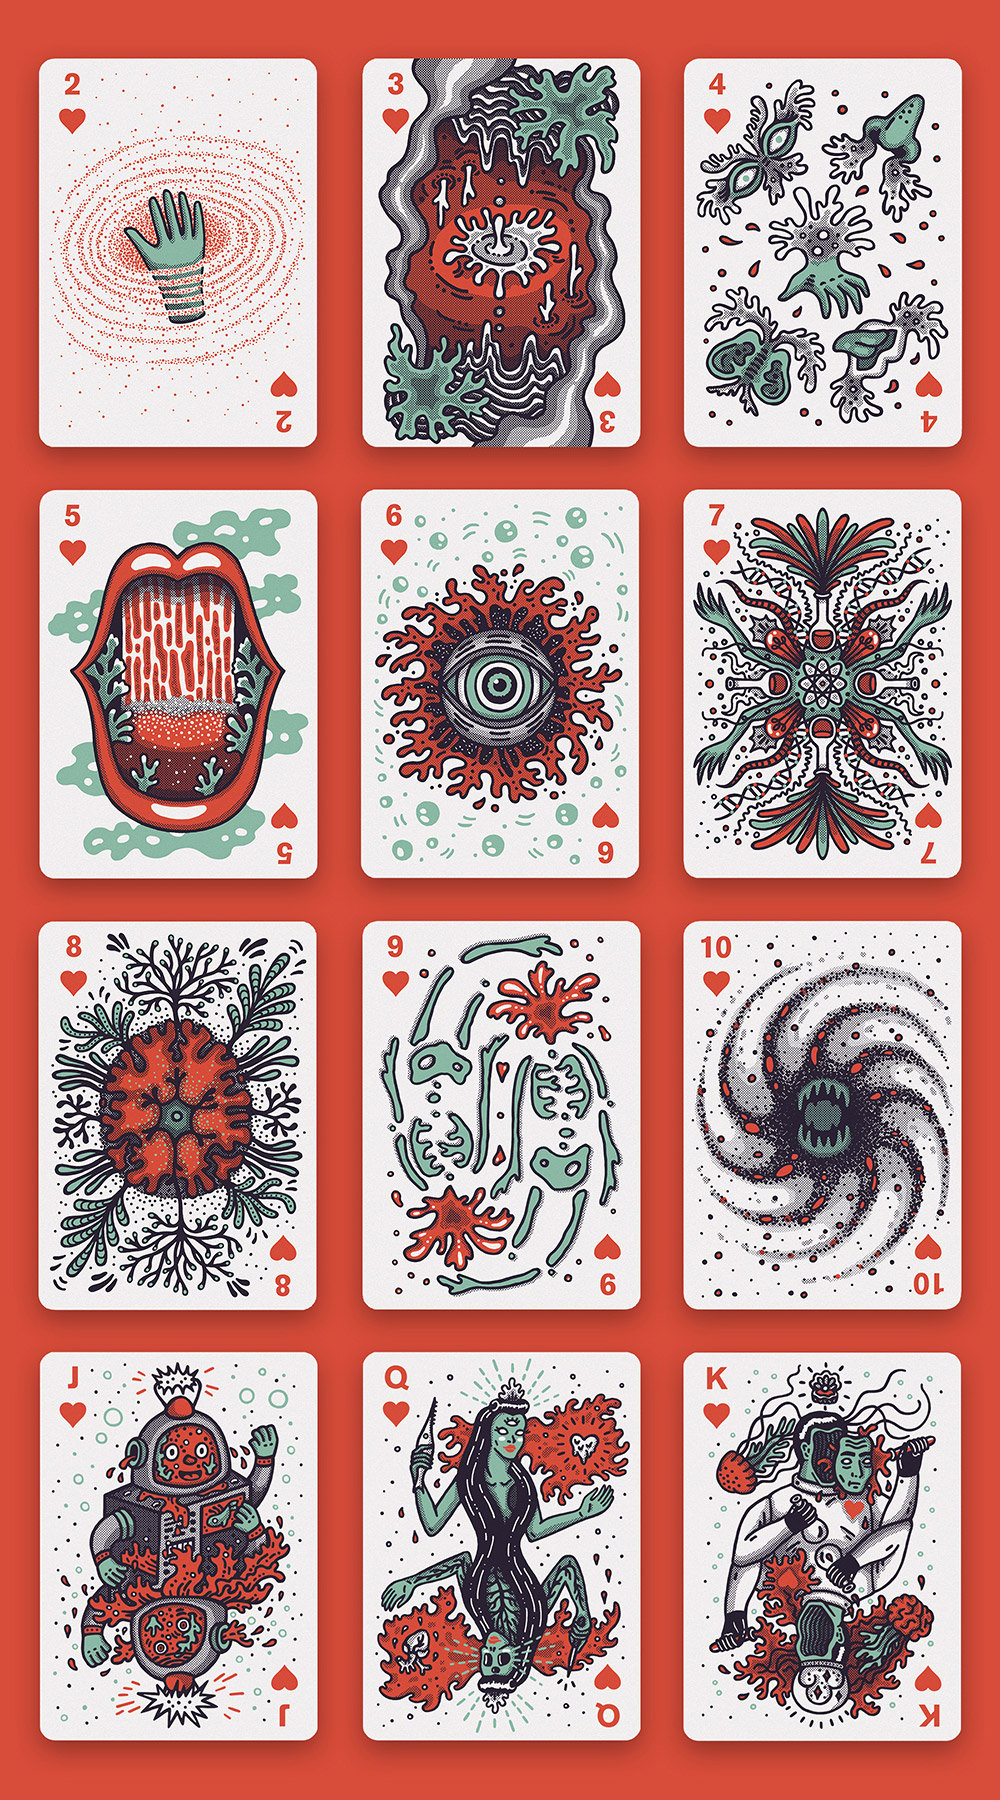 Into the Weird Playing Cards